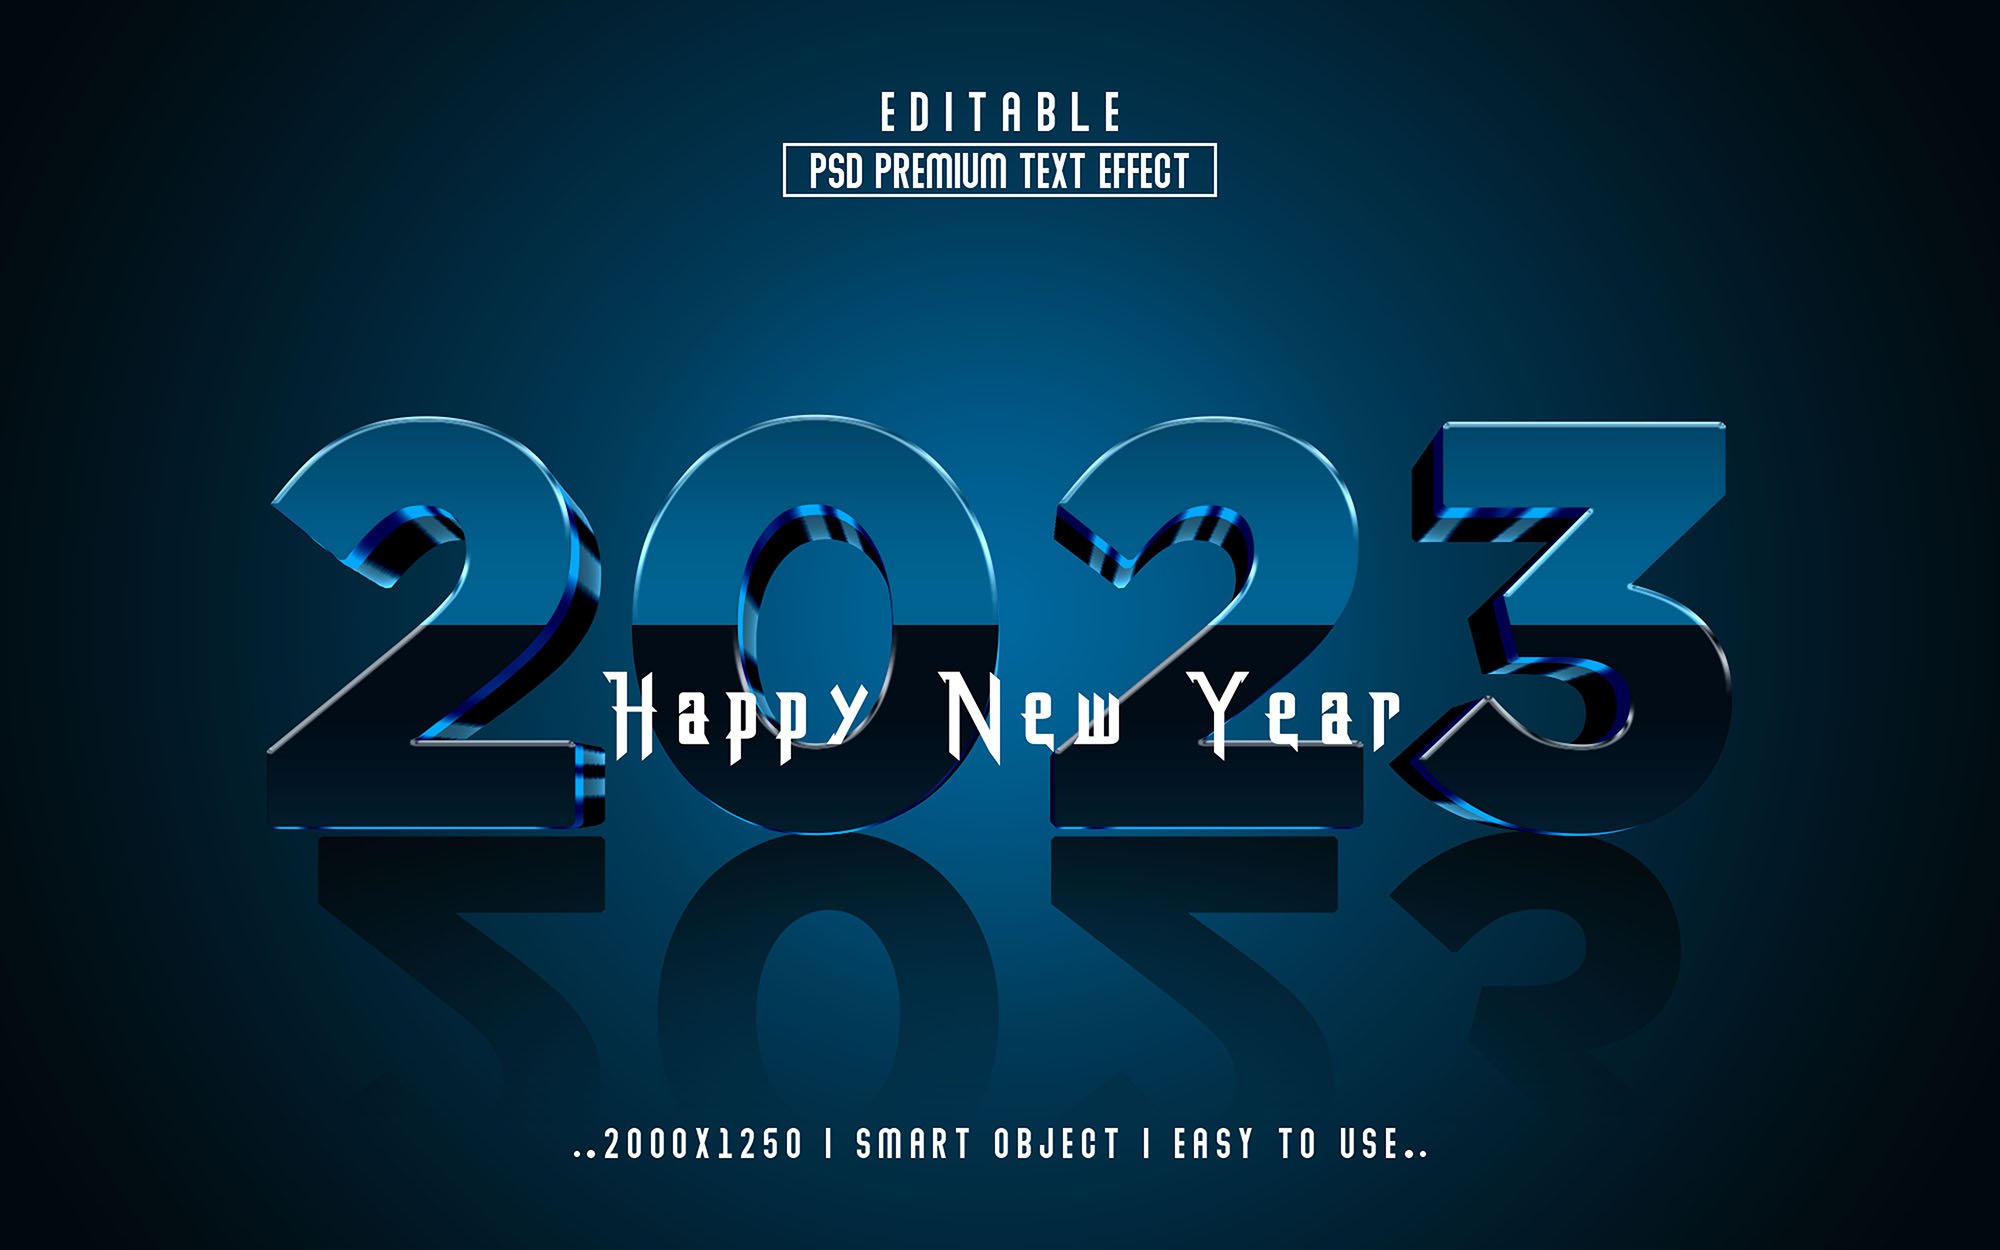 Happy new year 2013 wallpaper with a blue background.